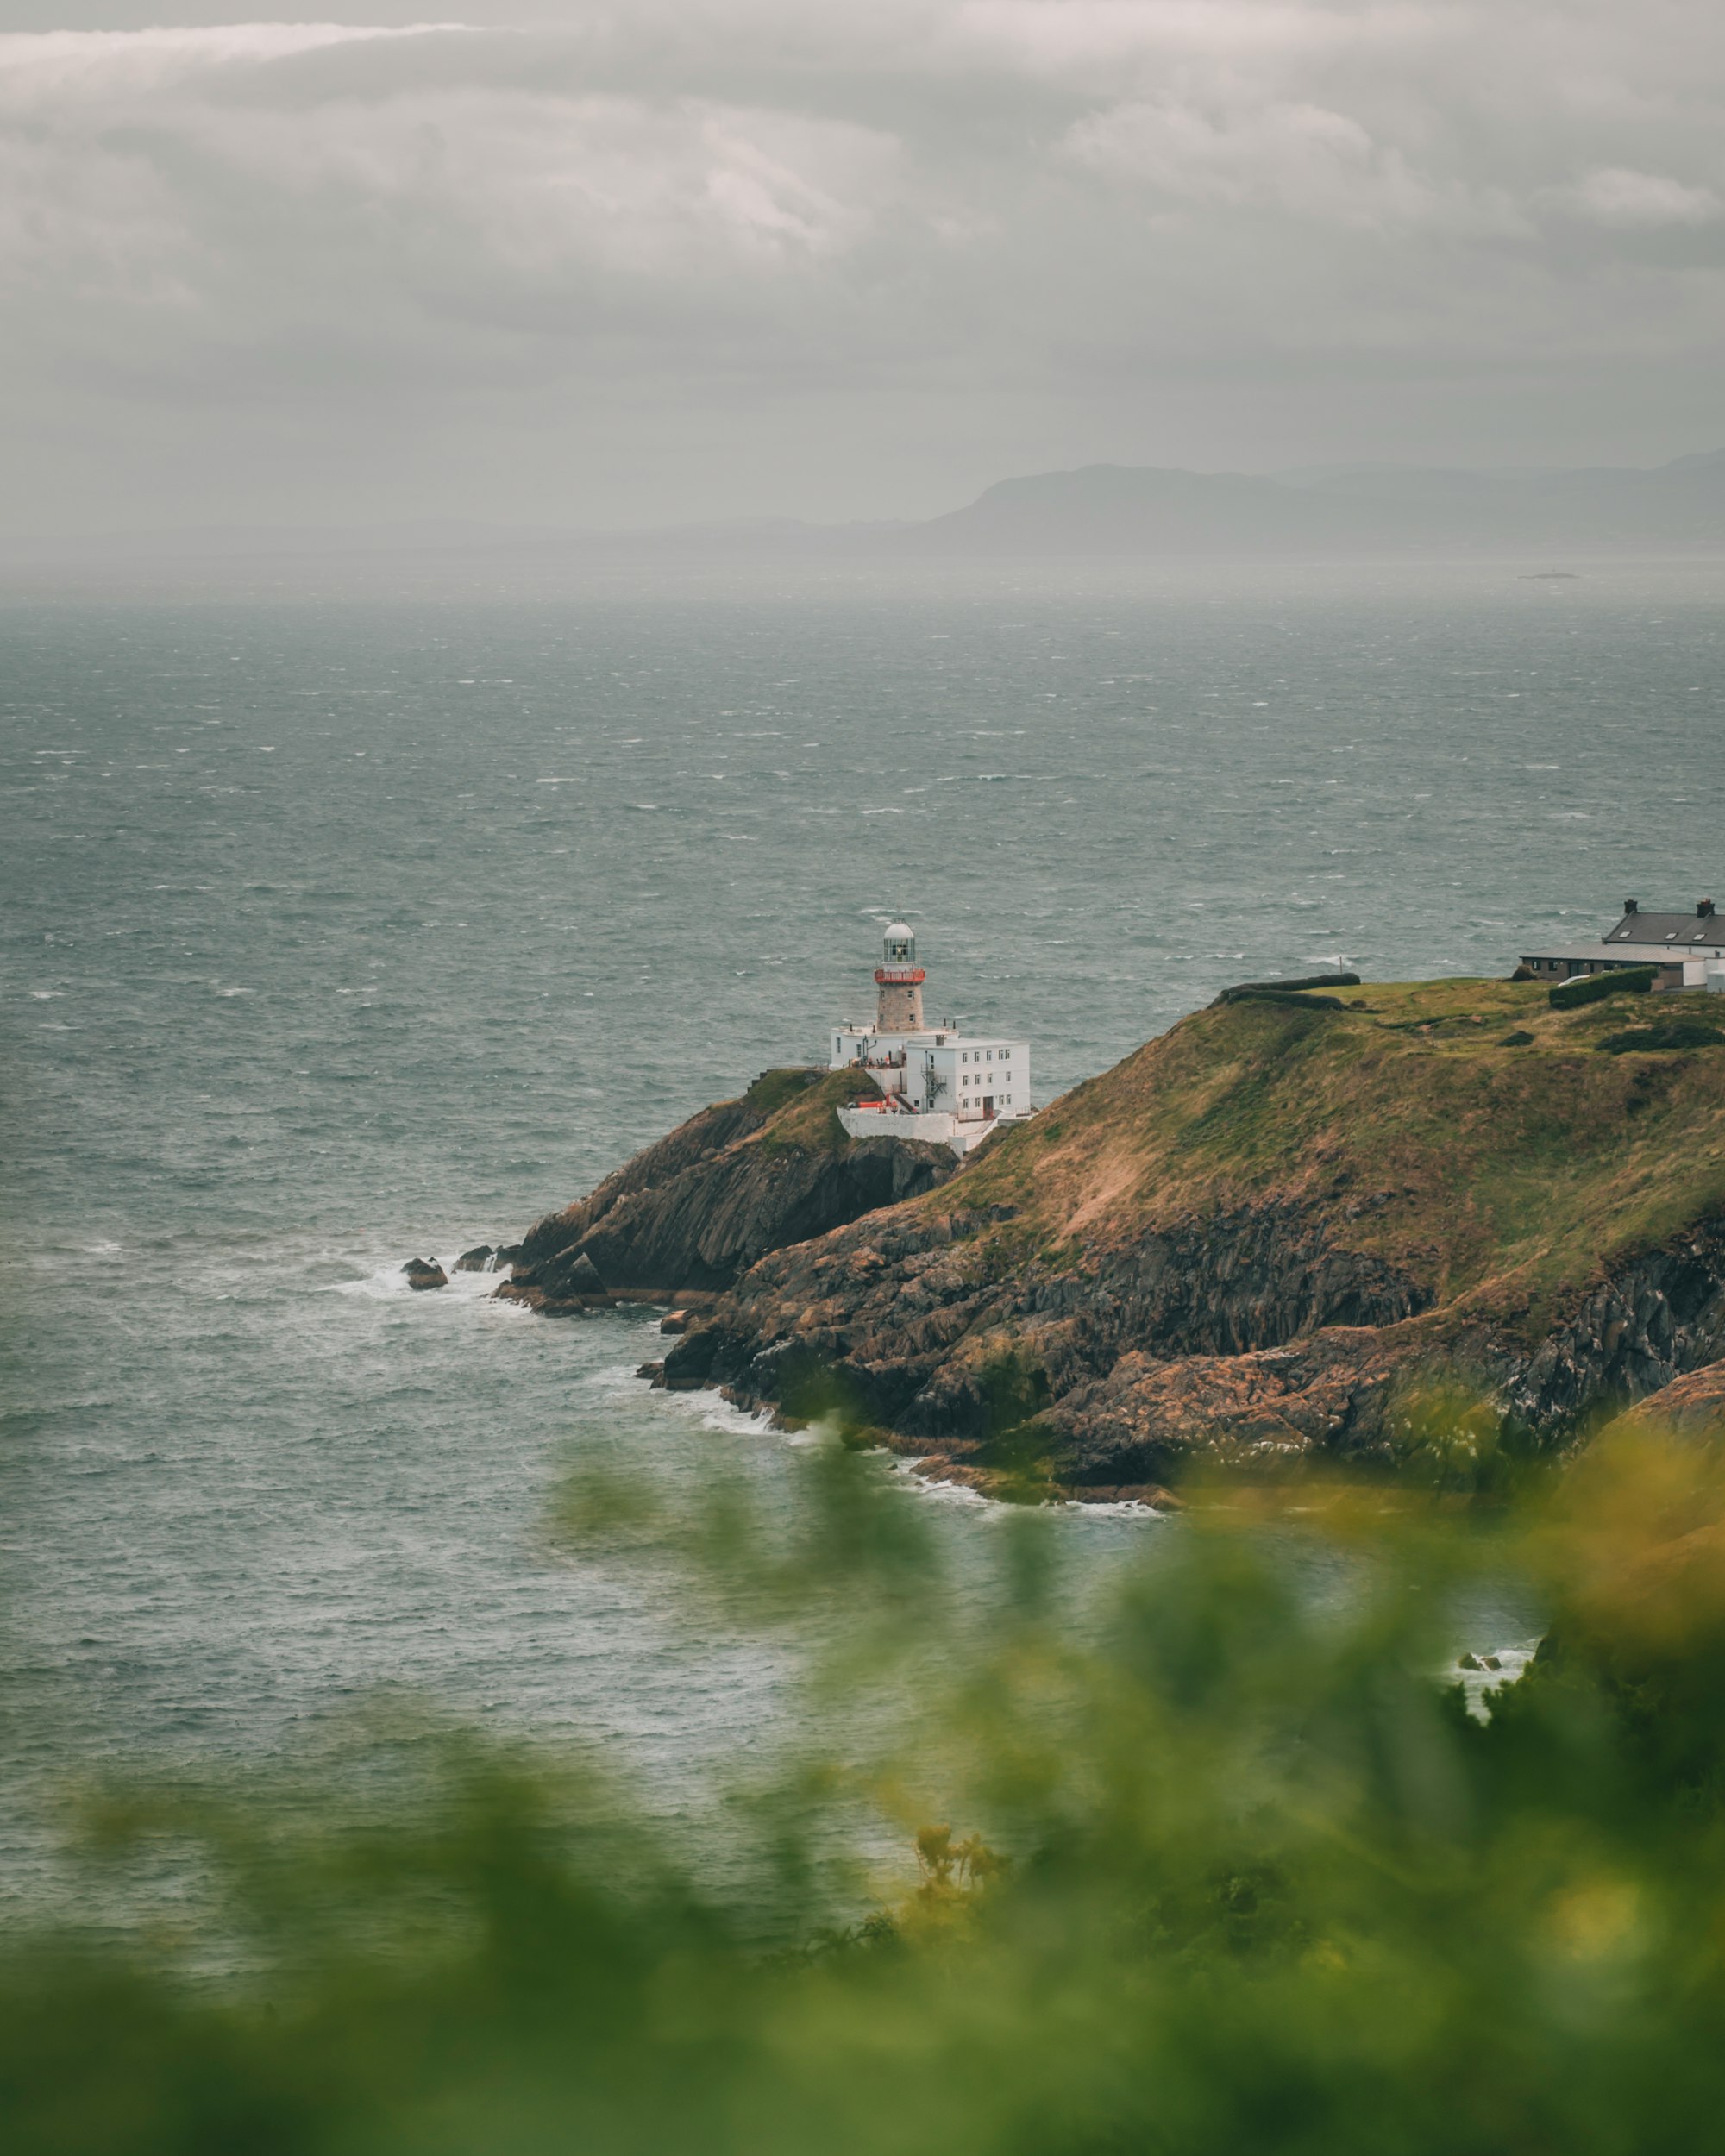 Howth lighthouse, Dublin Ireland.  If you use my images, please support me on Instagram @majesticlukas
Thank you <3